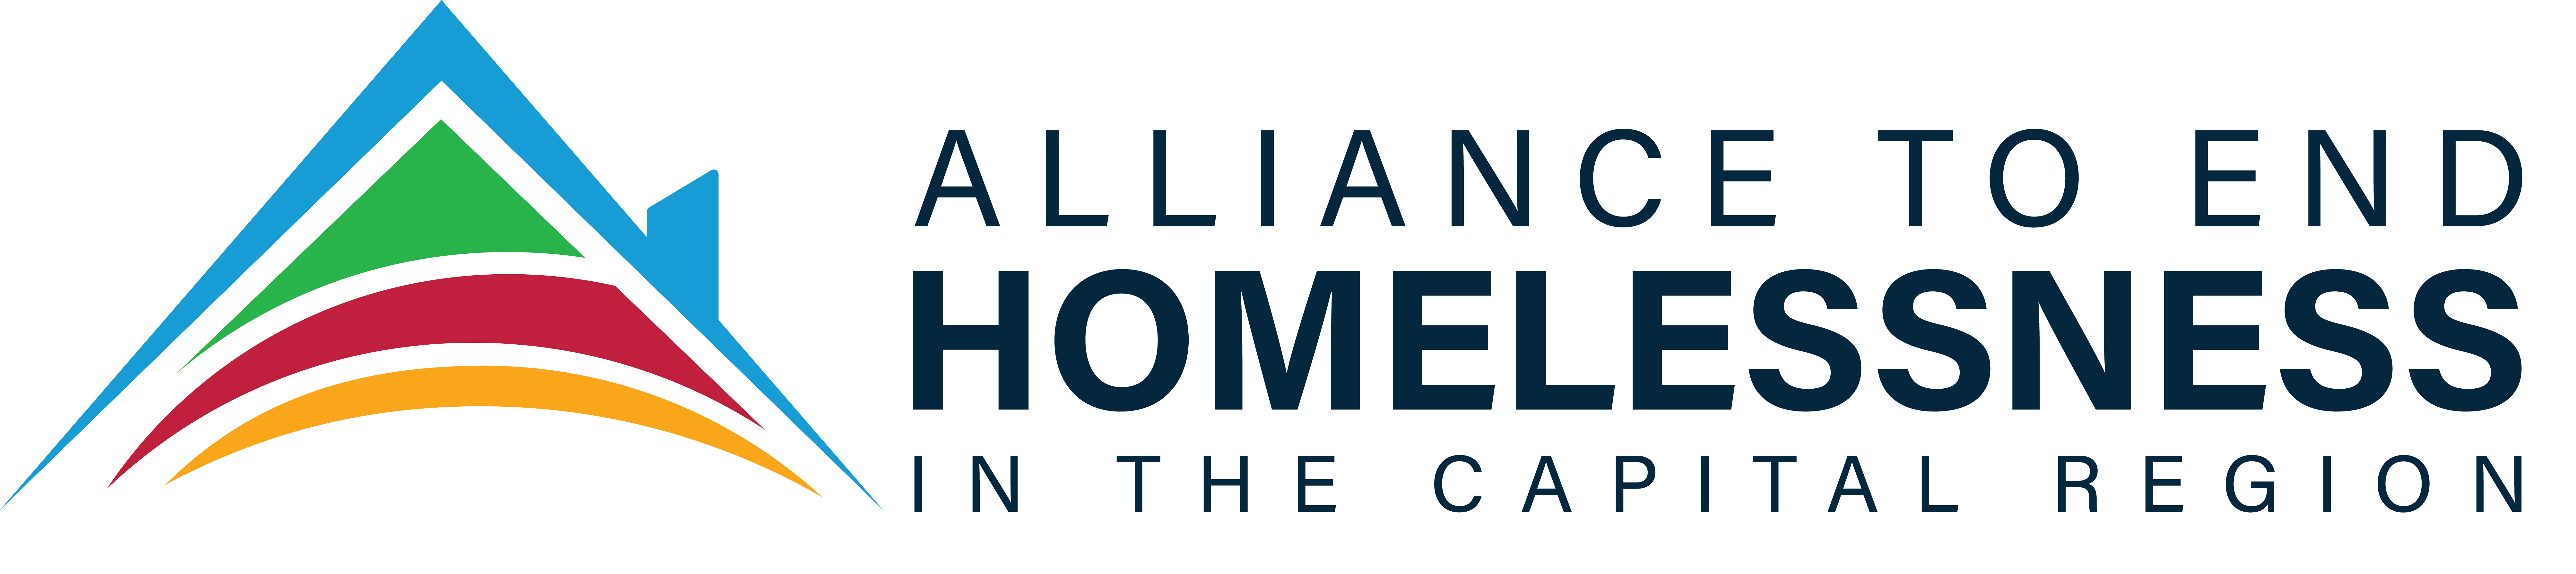 Alliance to End Homelessness in the Capital Region